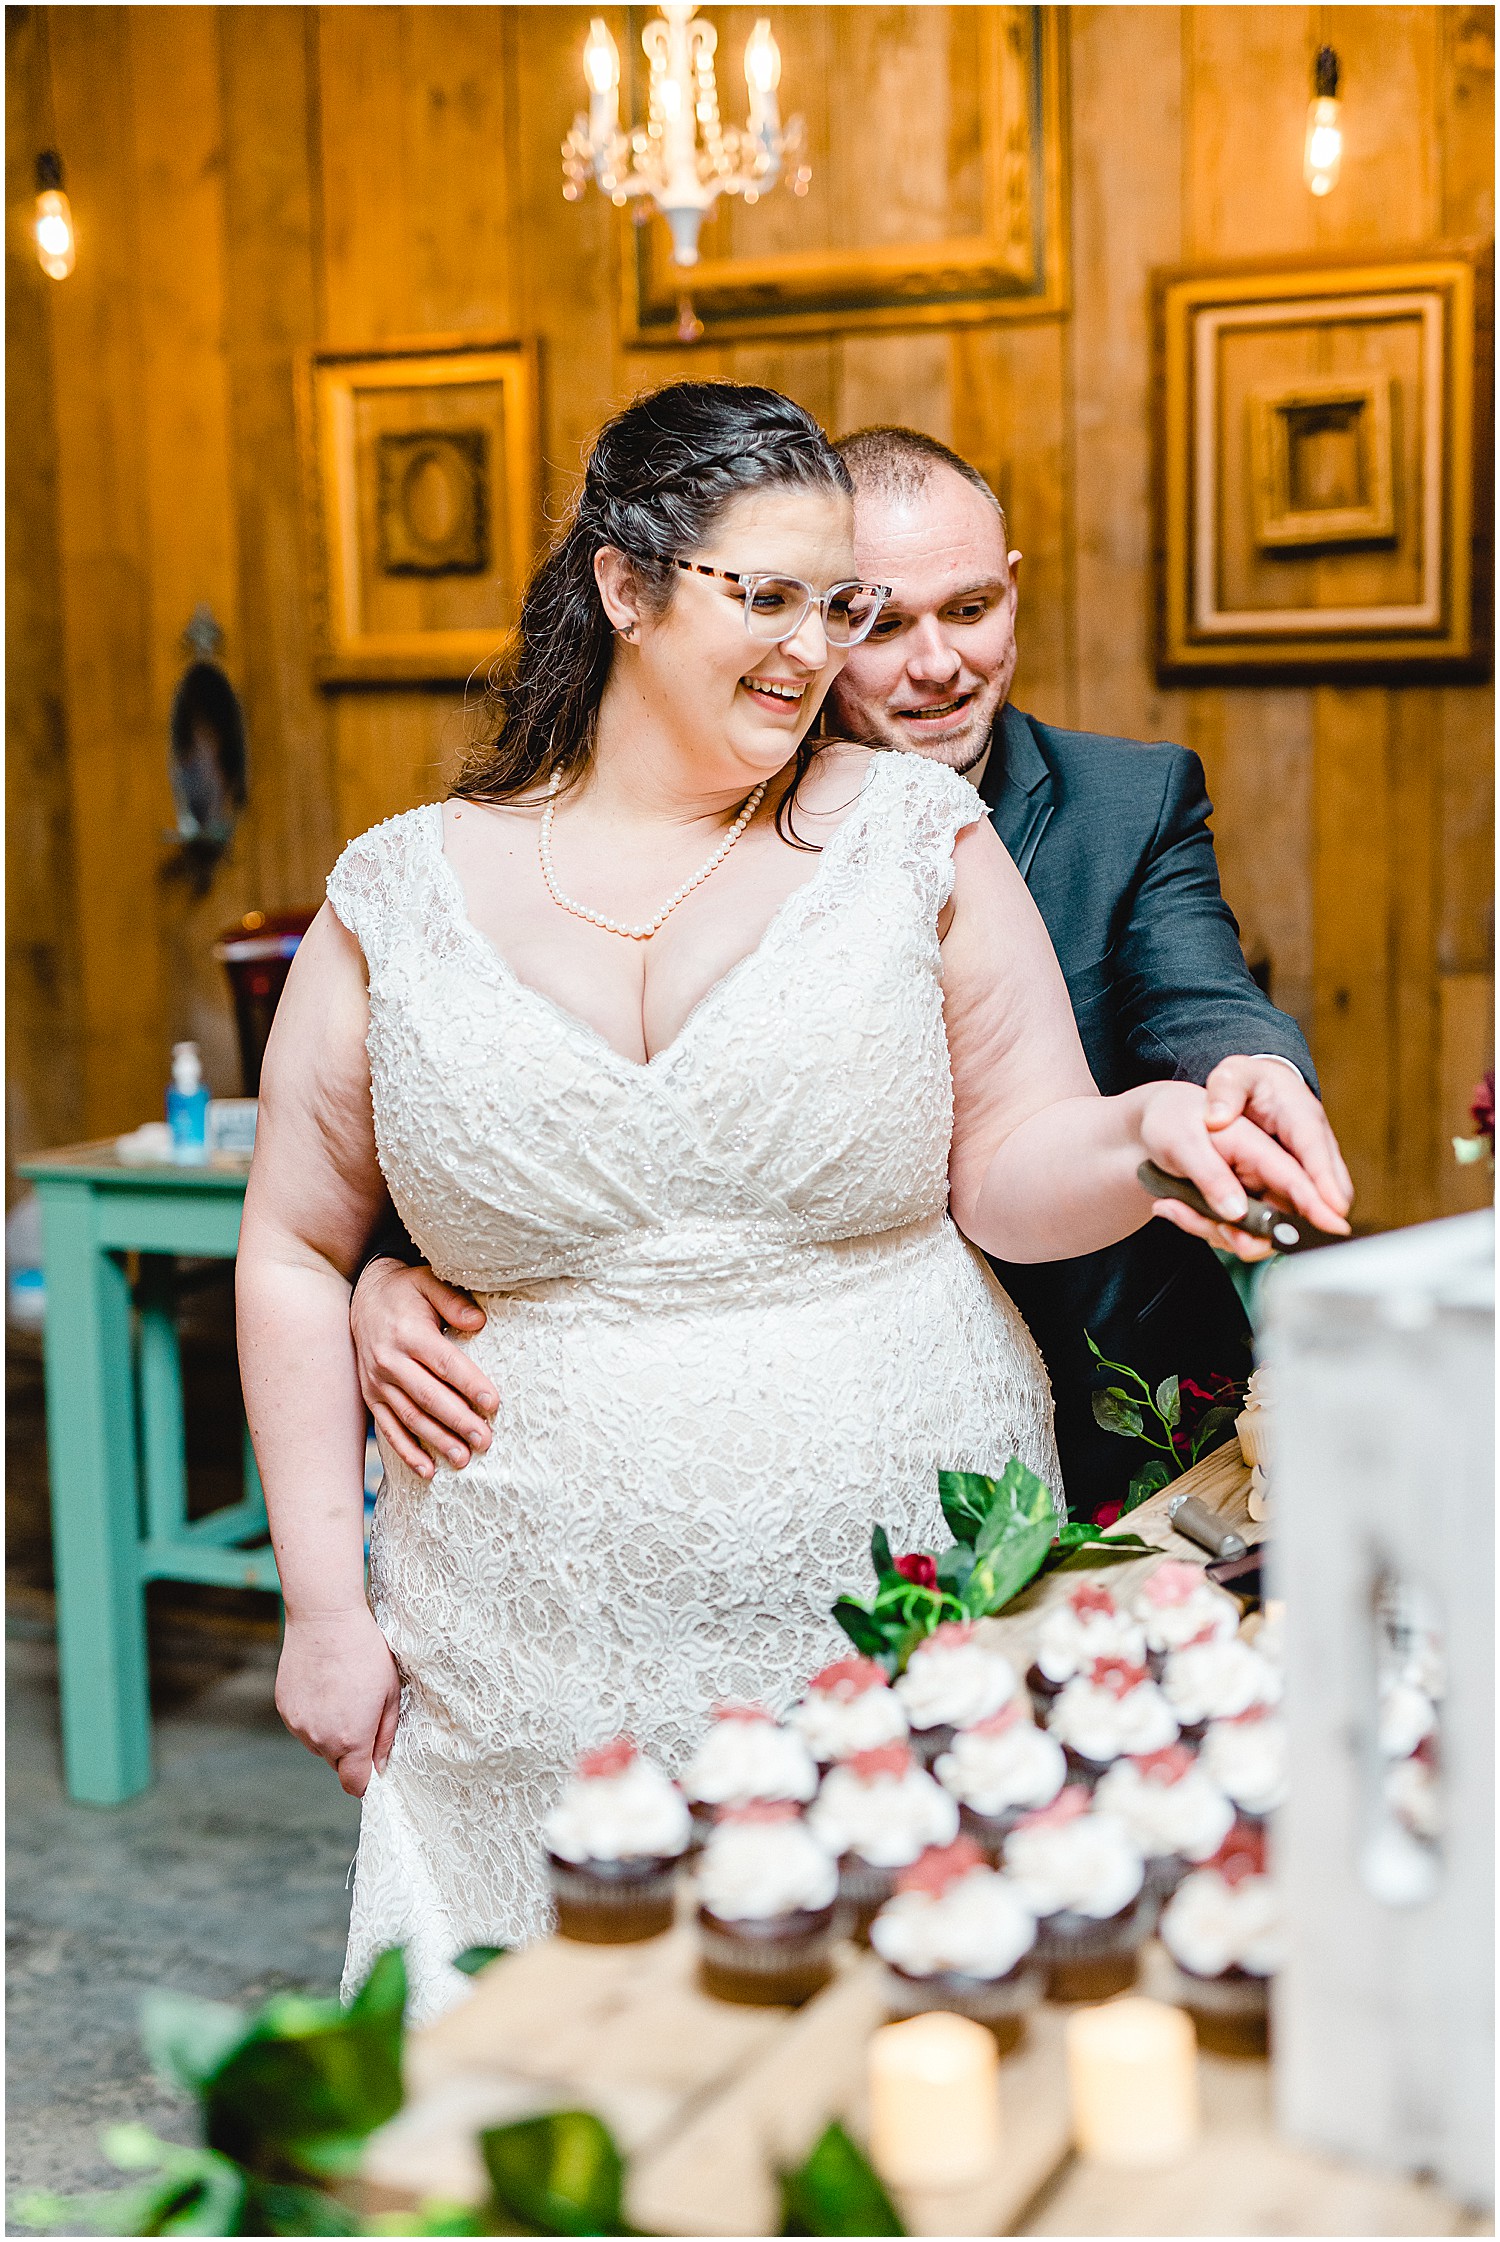 bride and groom cut the cake during wedding reception in barn